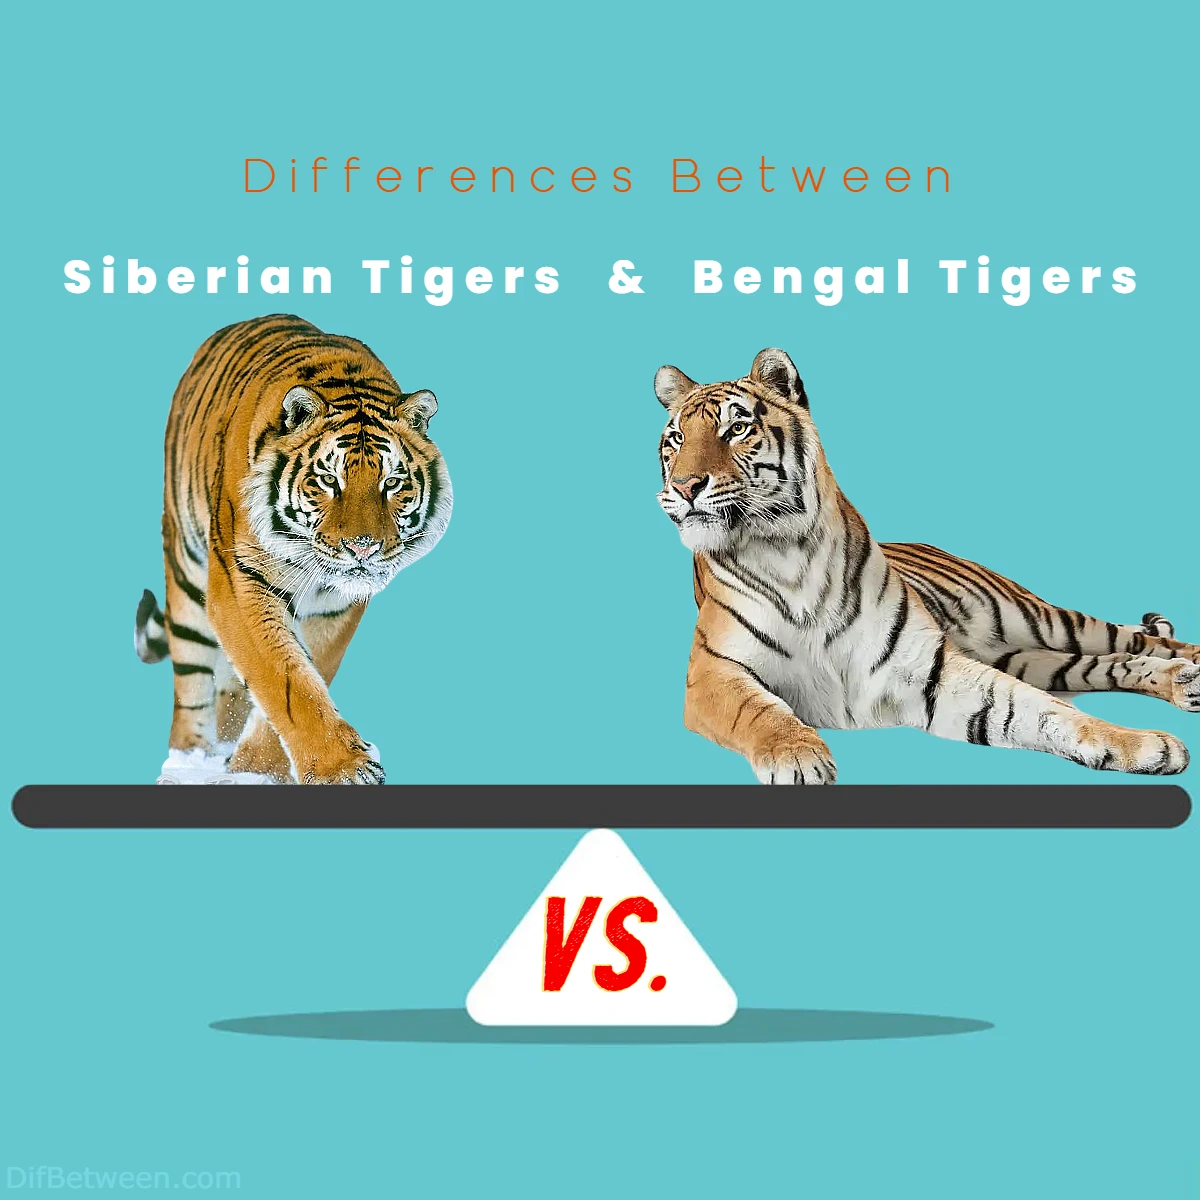 Differences Between Siberian Tigers vs Bengal Tigers